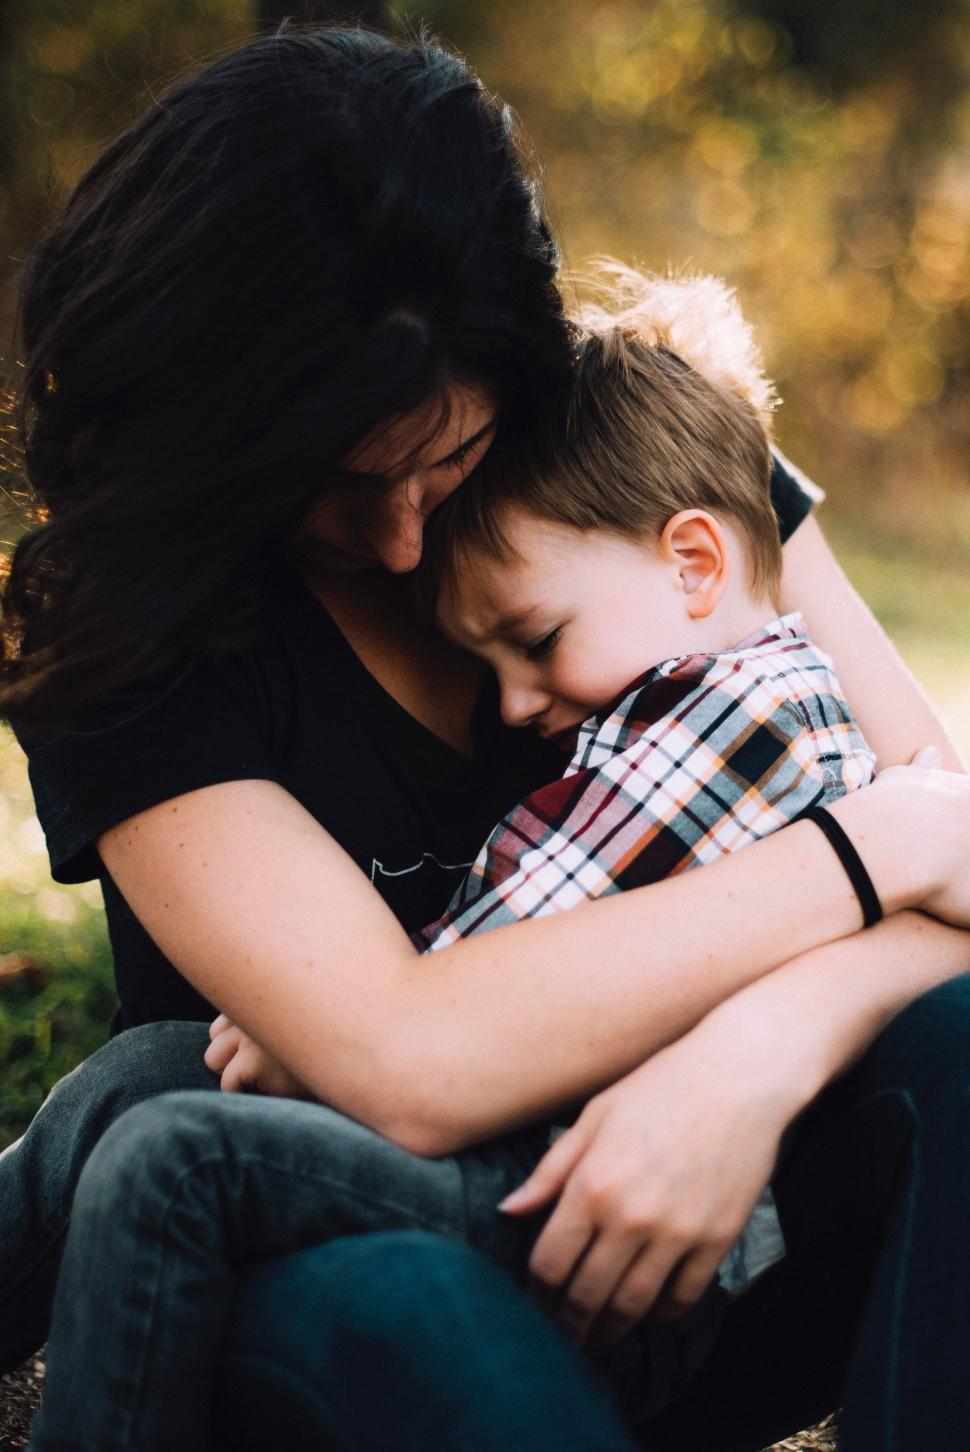 Free Image of Woman Hugging Child in Park 